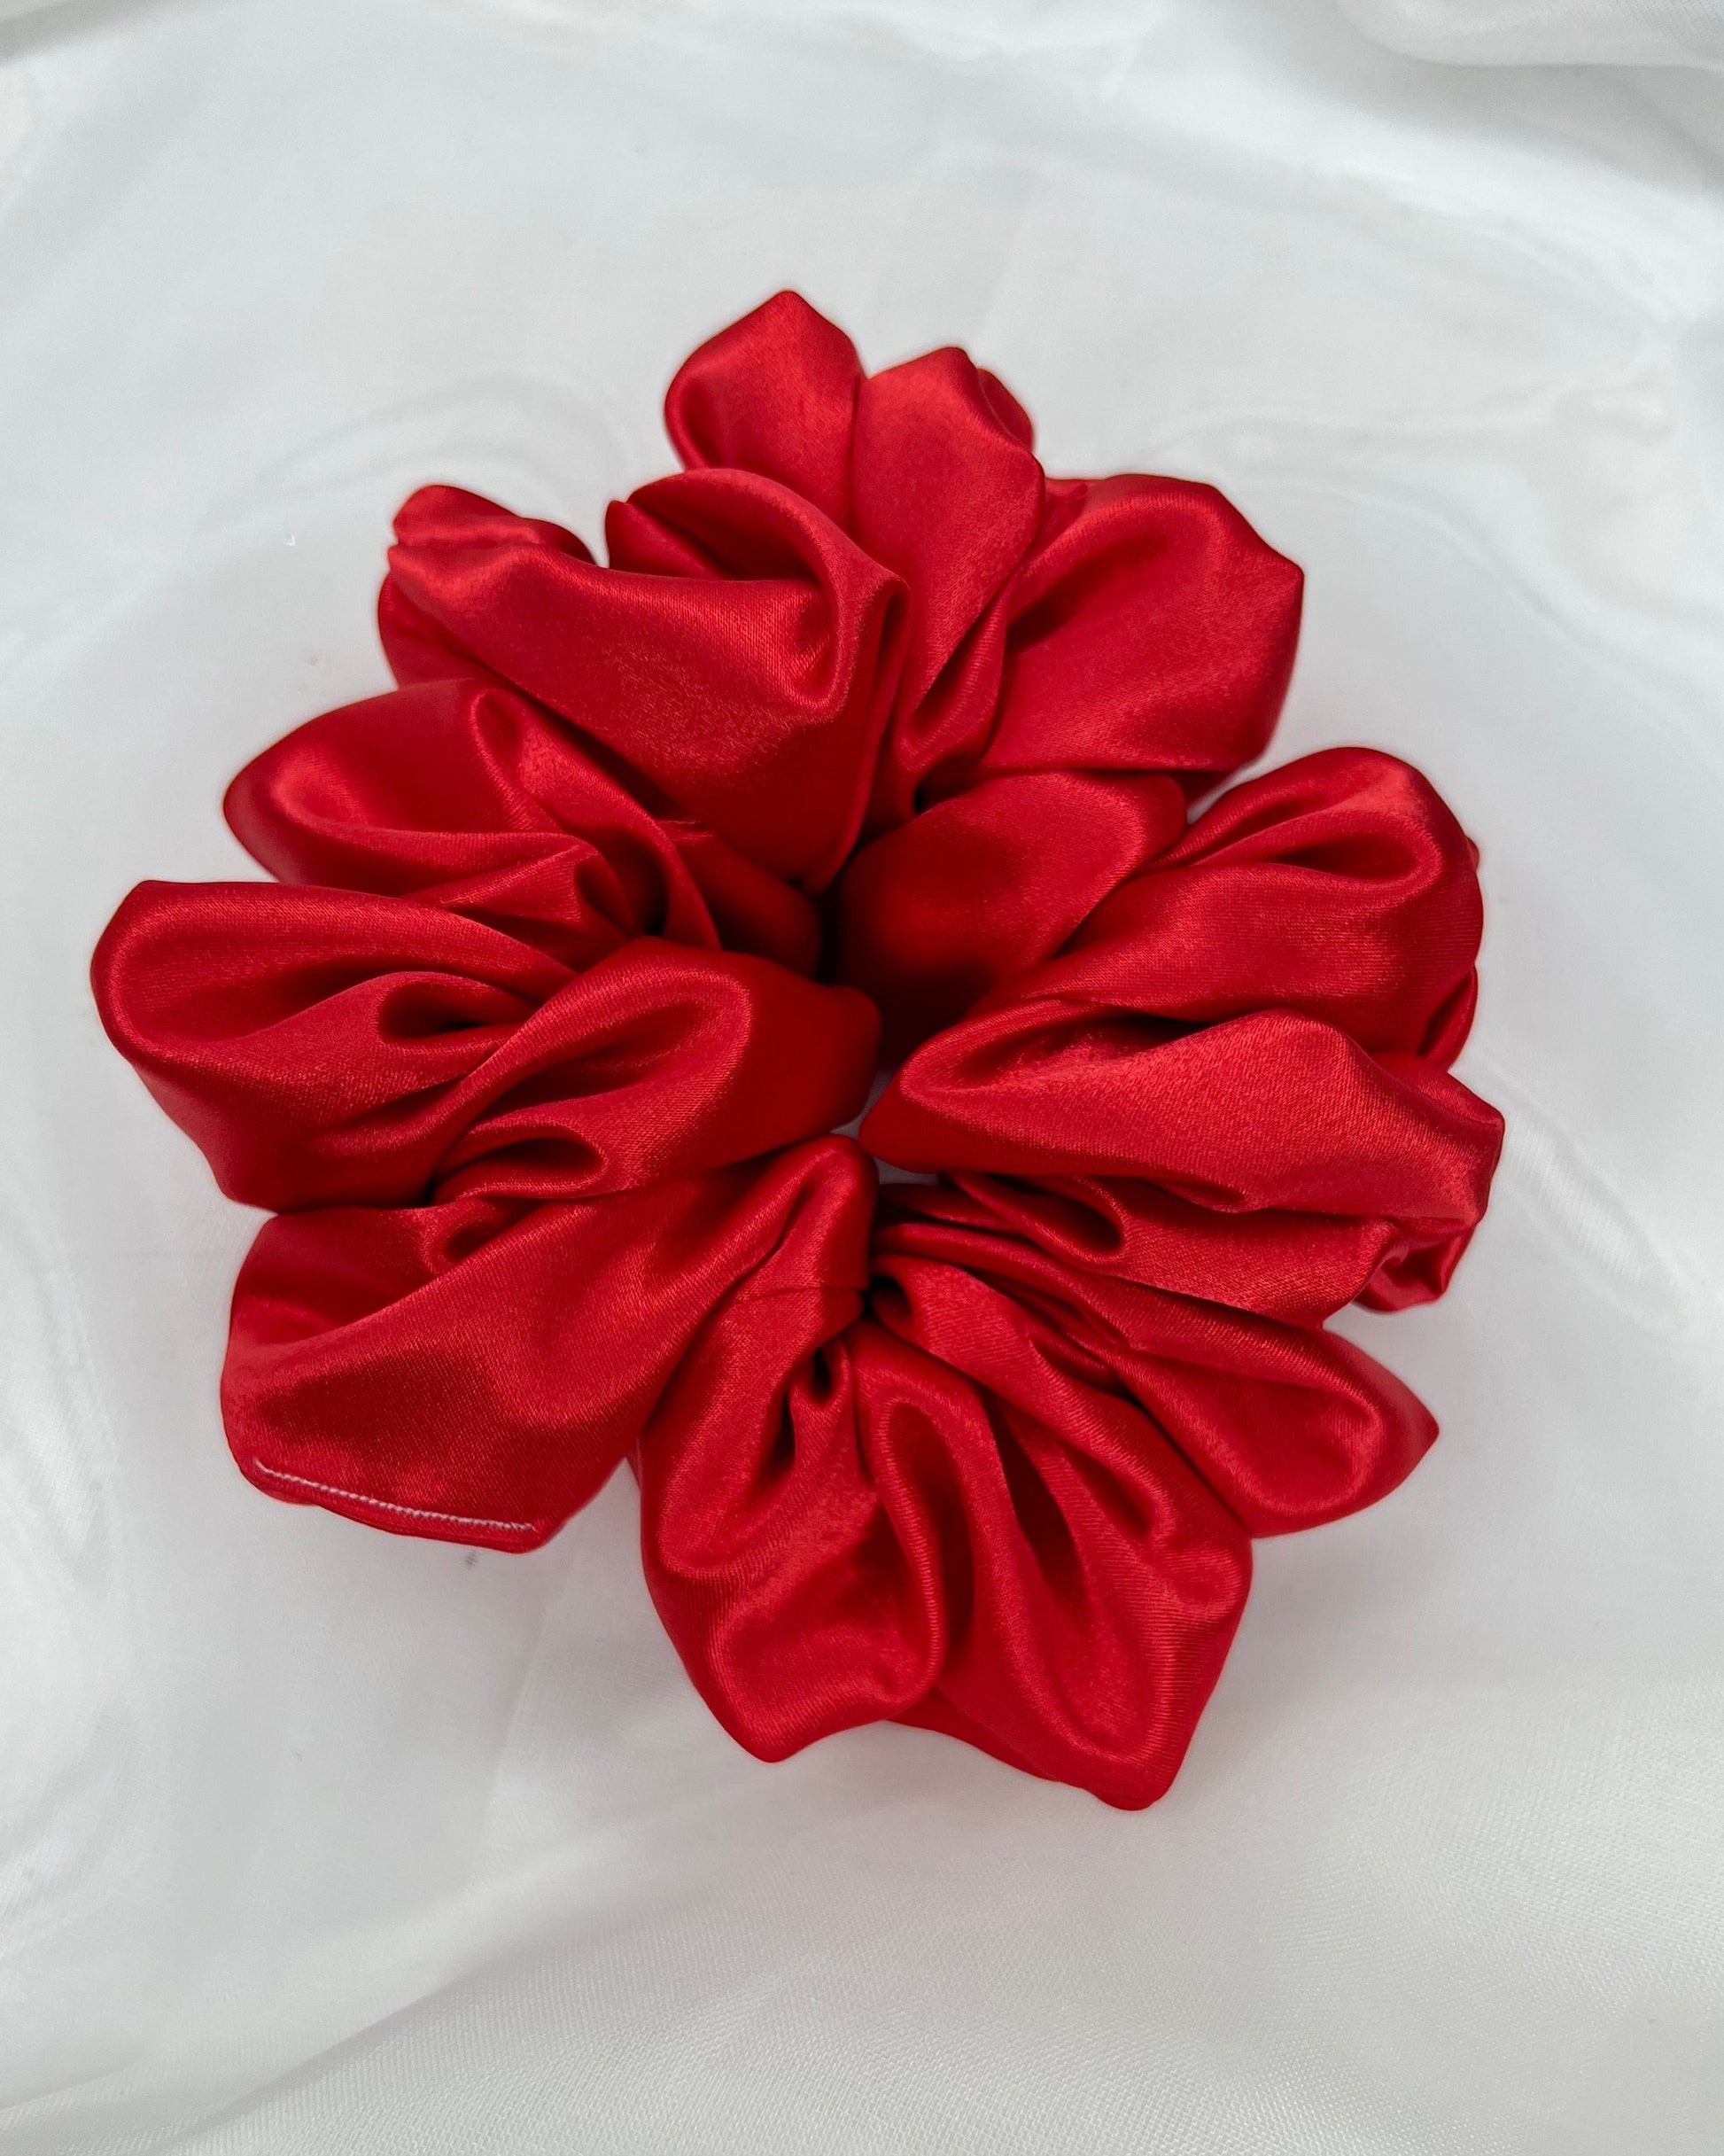 Sage + Stone Handmade Scrunchies - Christmas Lush: Hand made in Bunbury WA by Sage + Stone, these beautiful pieces will brighten up your outfit - wear them year round or during our favourite time of year with your Ch - Ciao Bella Dresses 